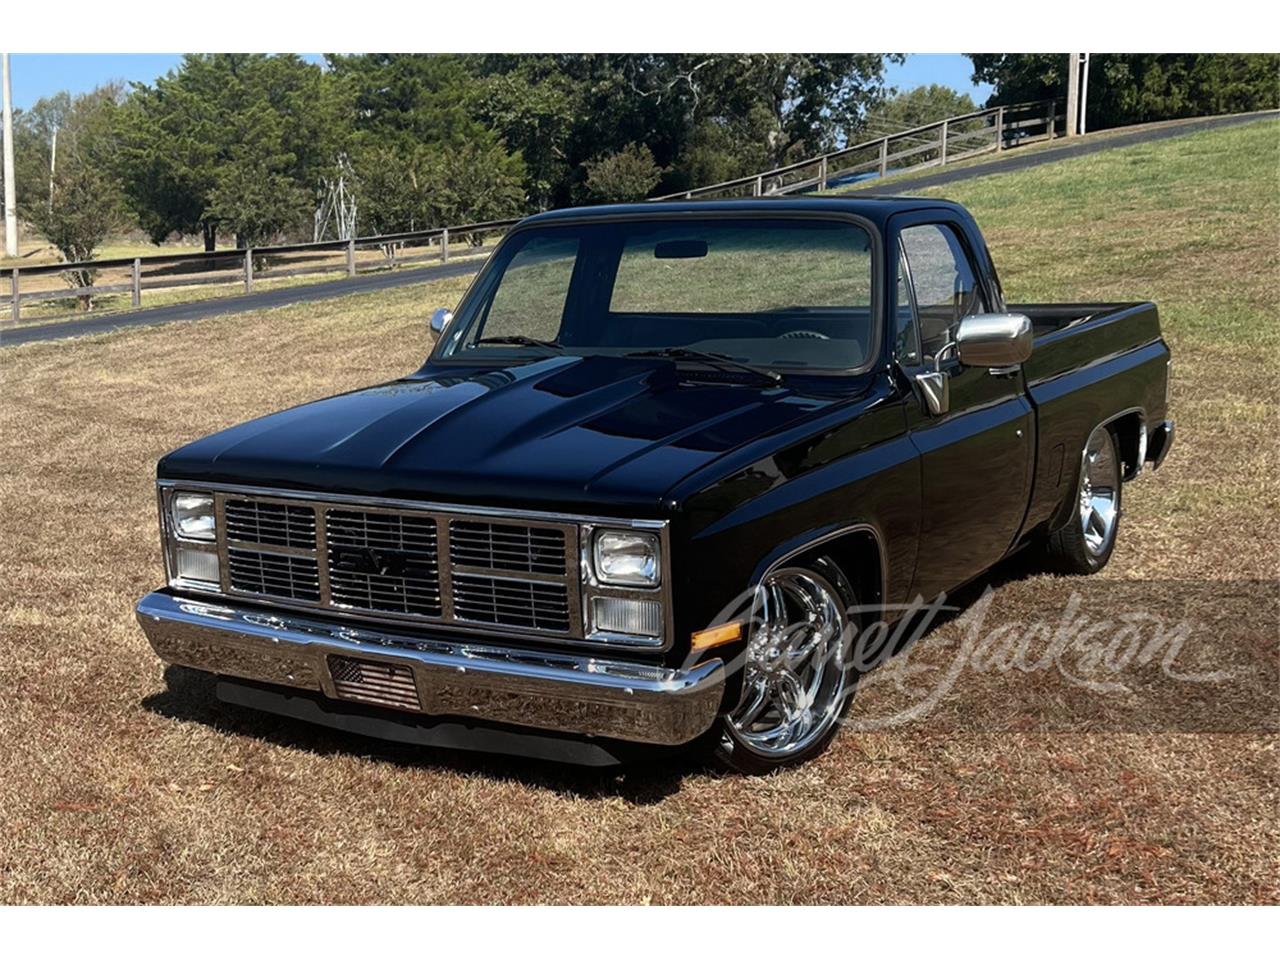 For Sale at Auction: 1987 GMC Sierra 1500 in New Orleans, Louisiana for sale in New Orleans, LA